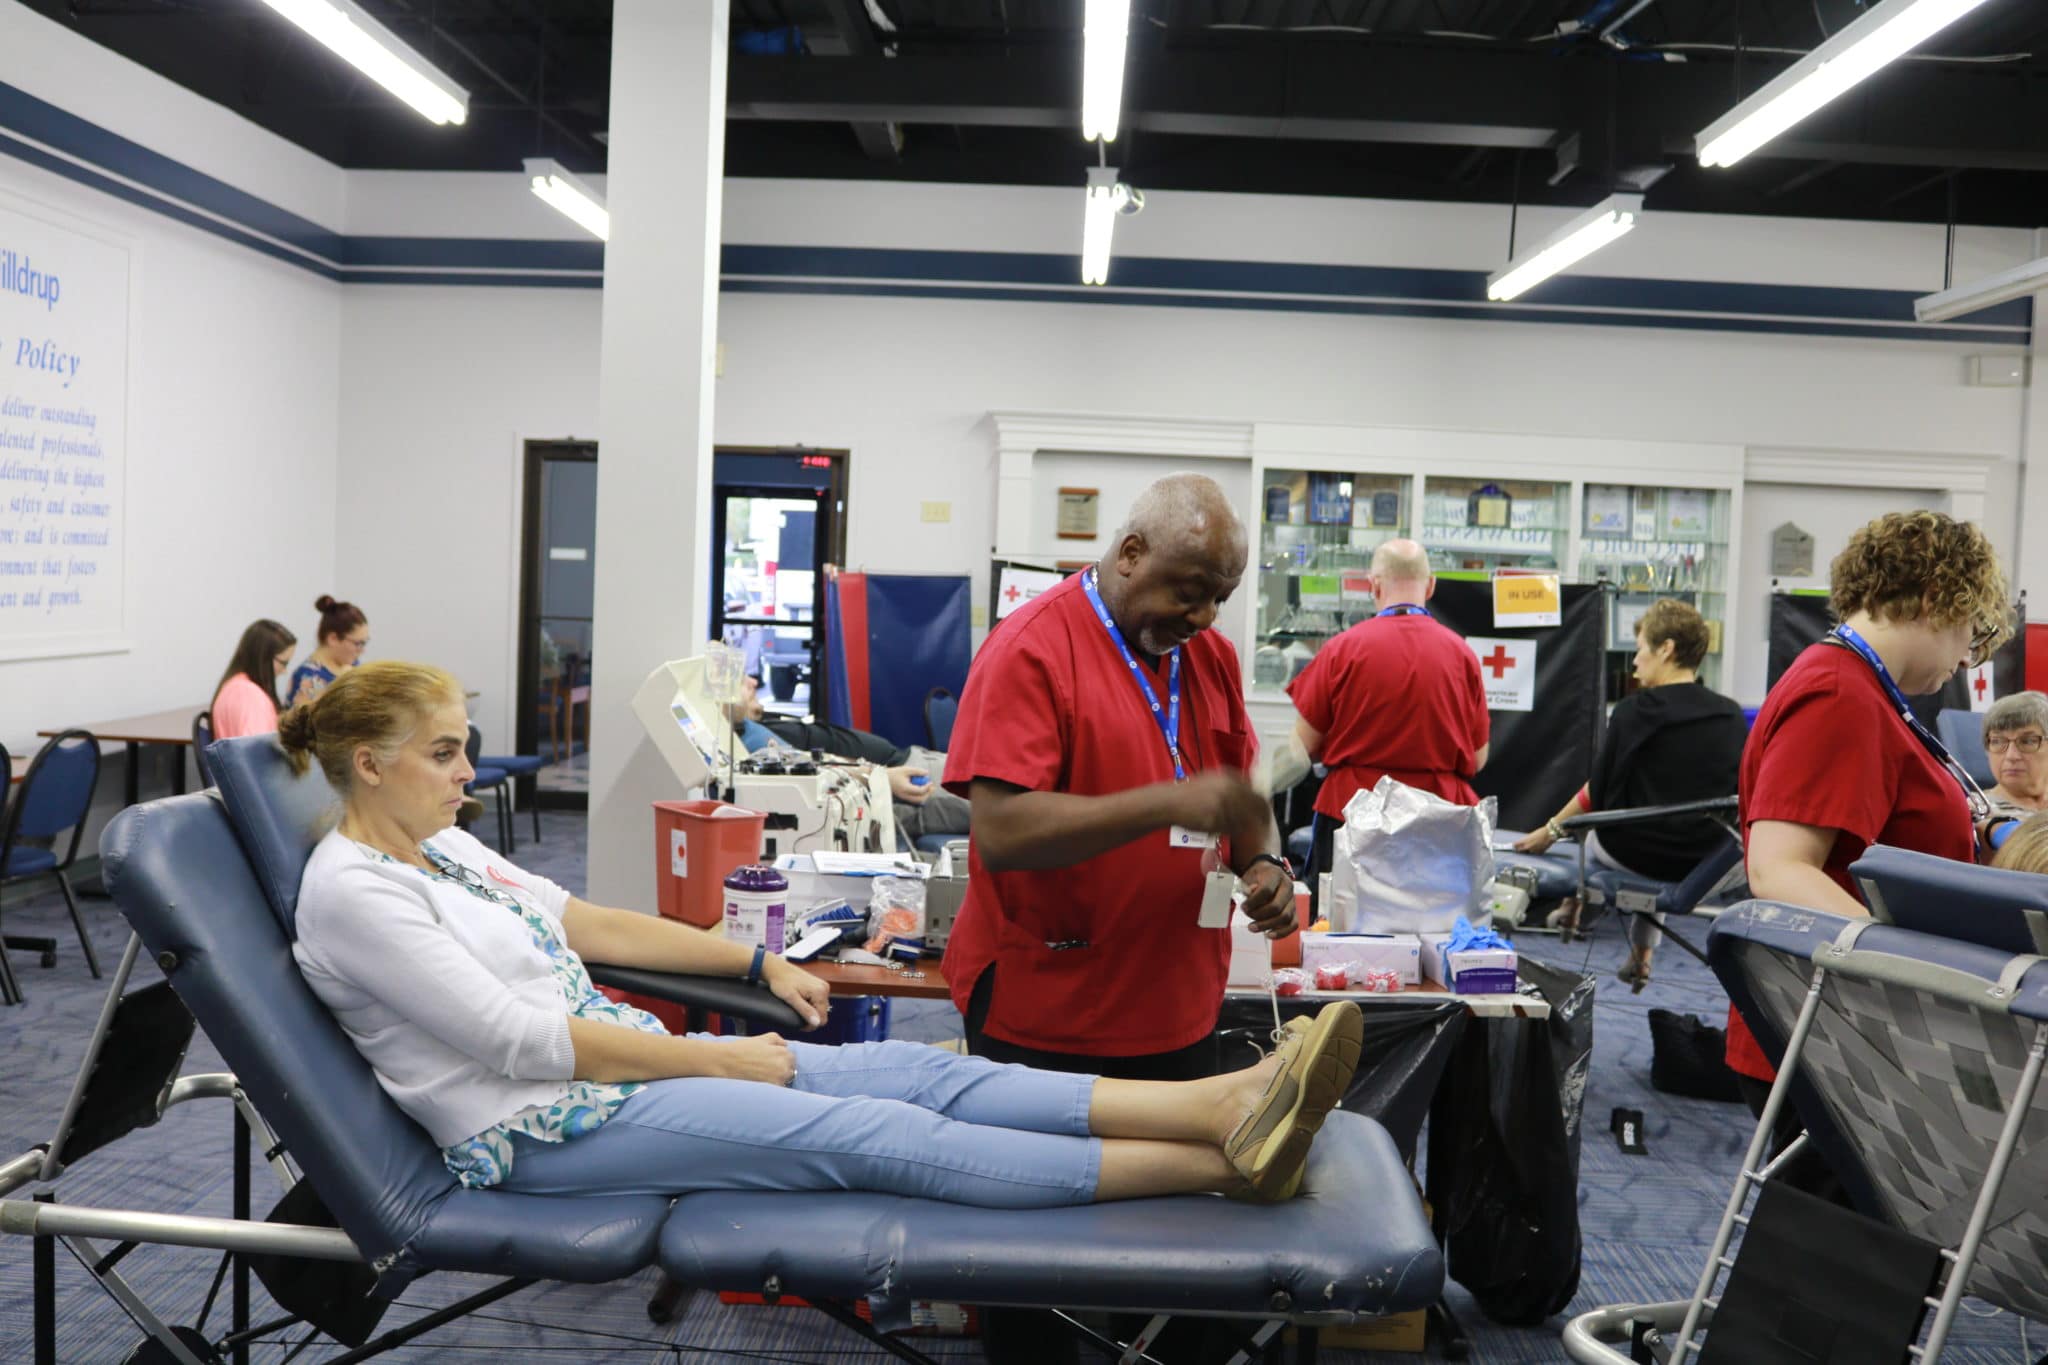 Woman laying down giving blood during blood donation drive at Hilldrup office